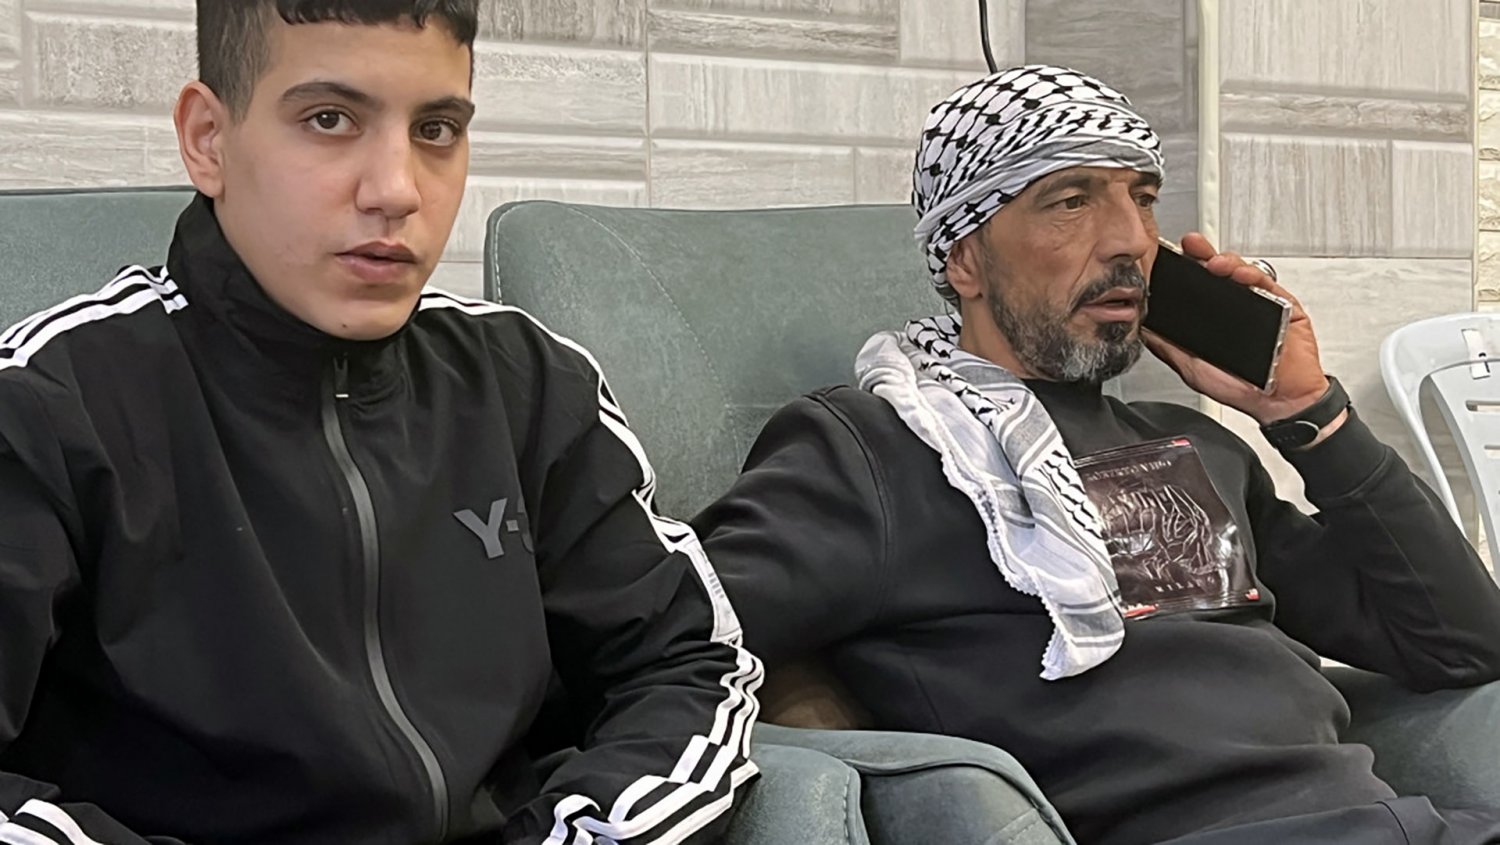 Palestinian Jerusalemite Ahmad al-Salaymeh, 14, one day after his release from Israeli detention as part of a larger swap between Israel and Hamas